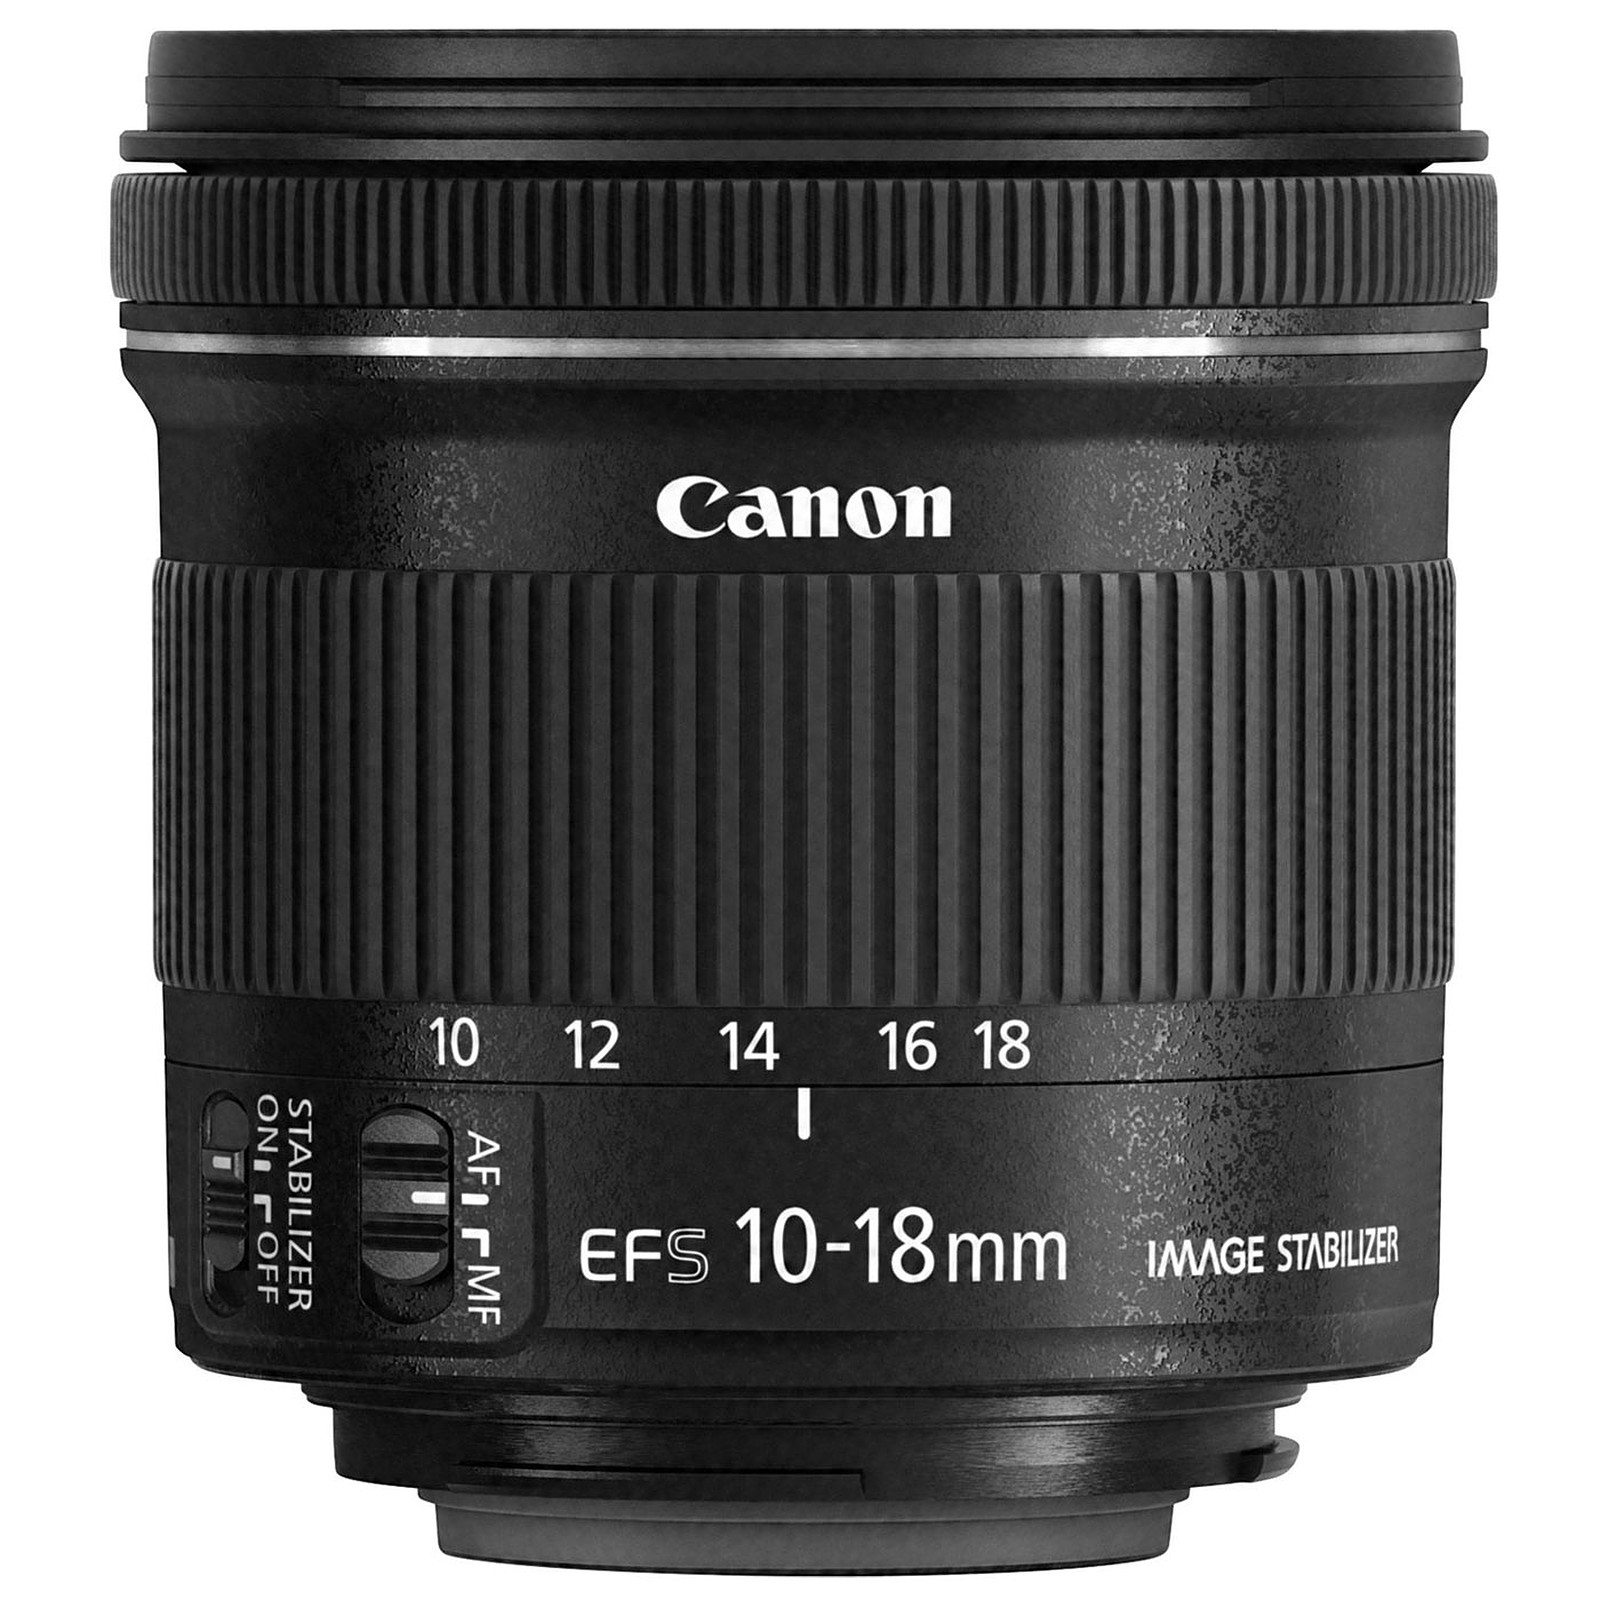 Canon EF-S 10-18mm f/4.5-5.6 IS STM - Objectif appareil photo Canon